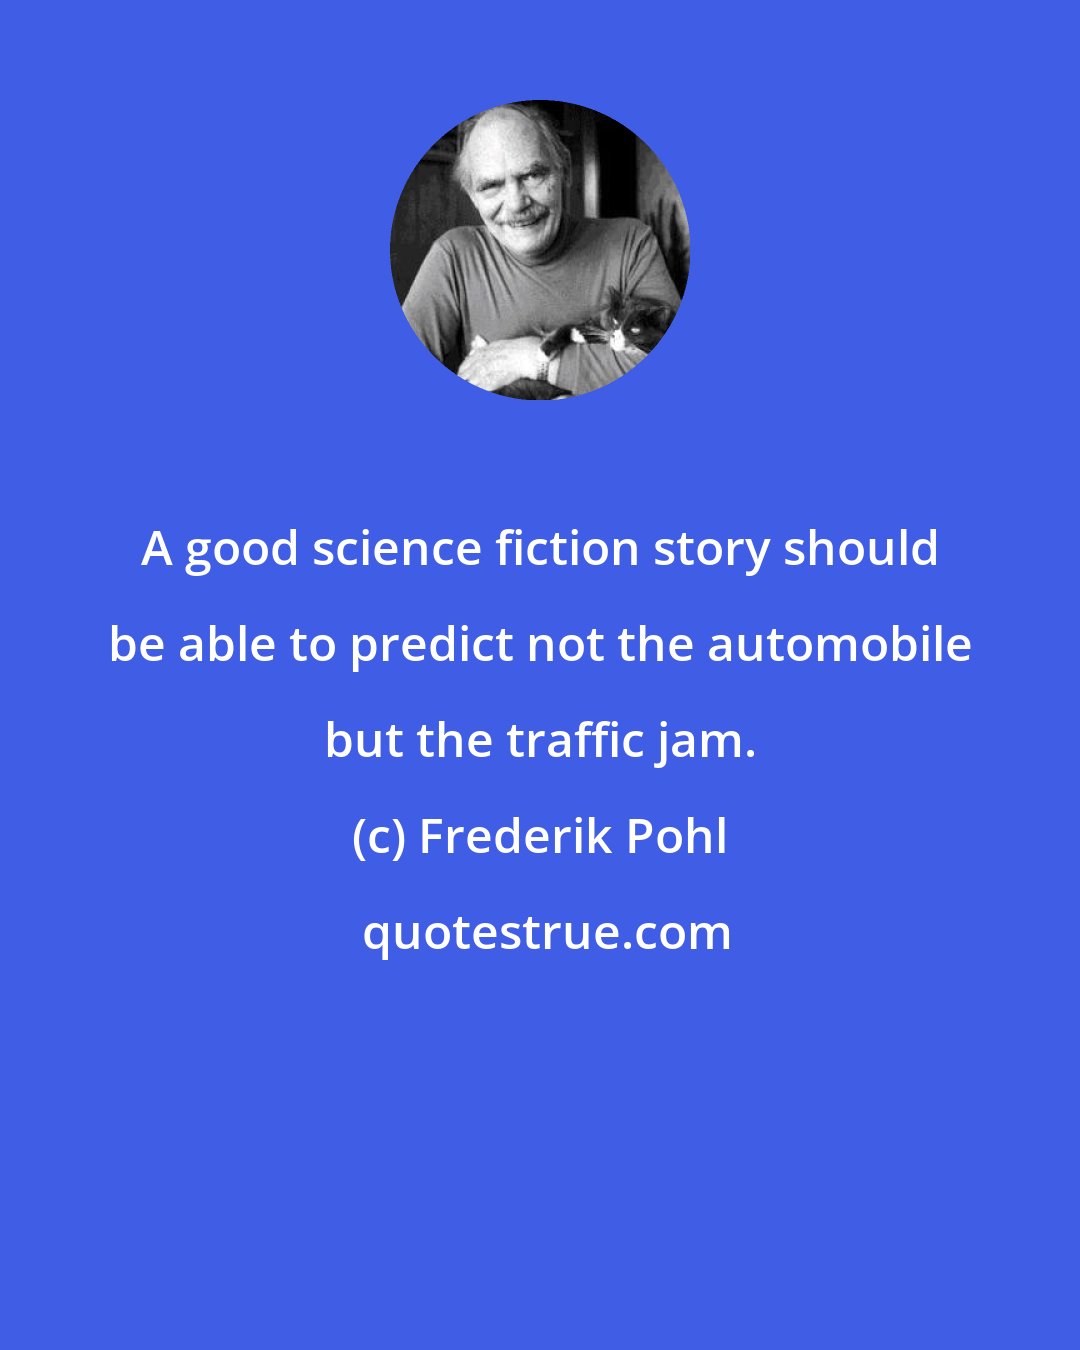 Frederik Pohl: A good science fiction story should be able to predict not the automobile but the traffic jam.